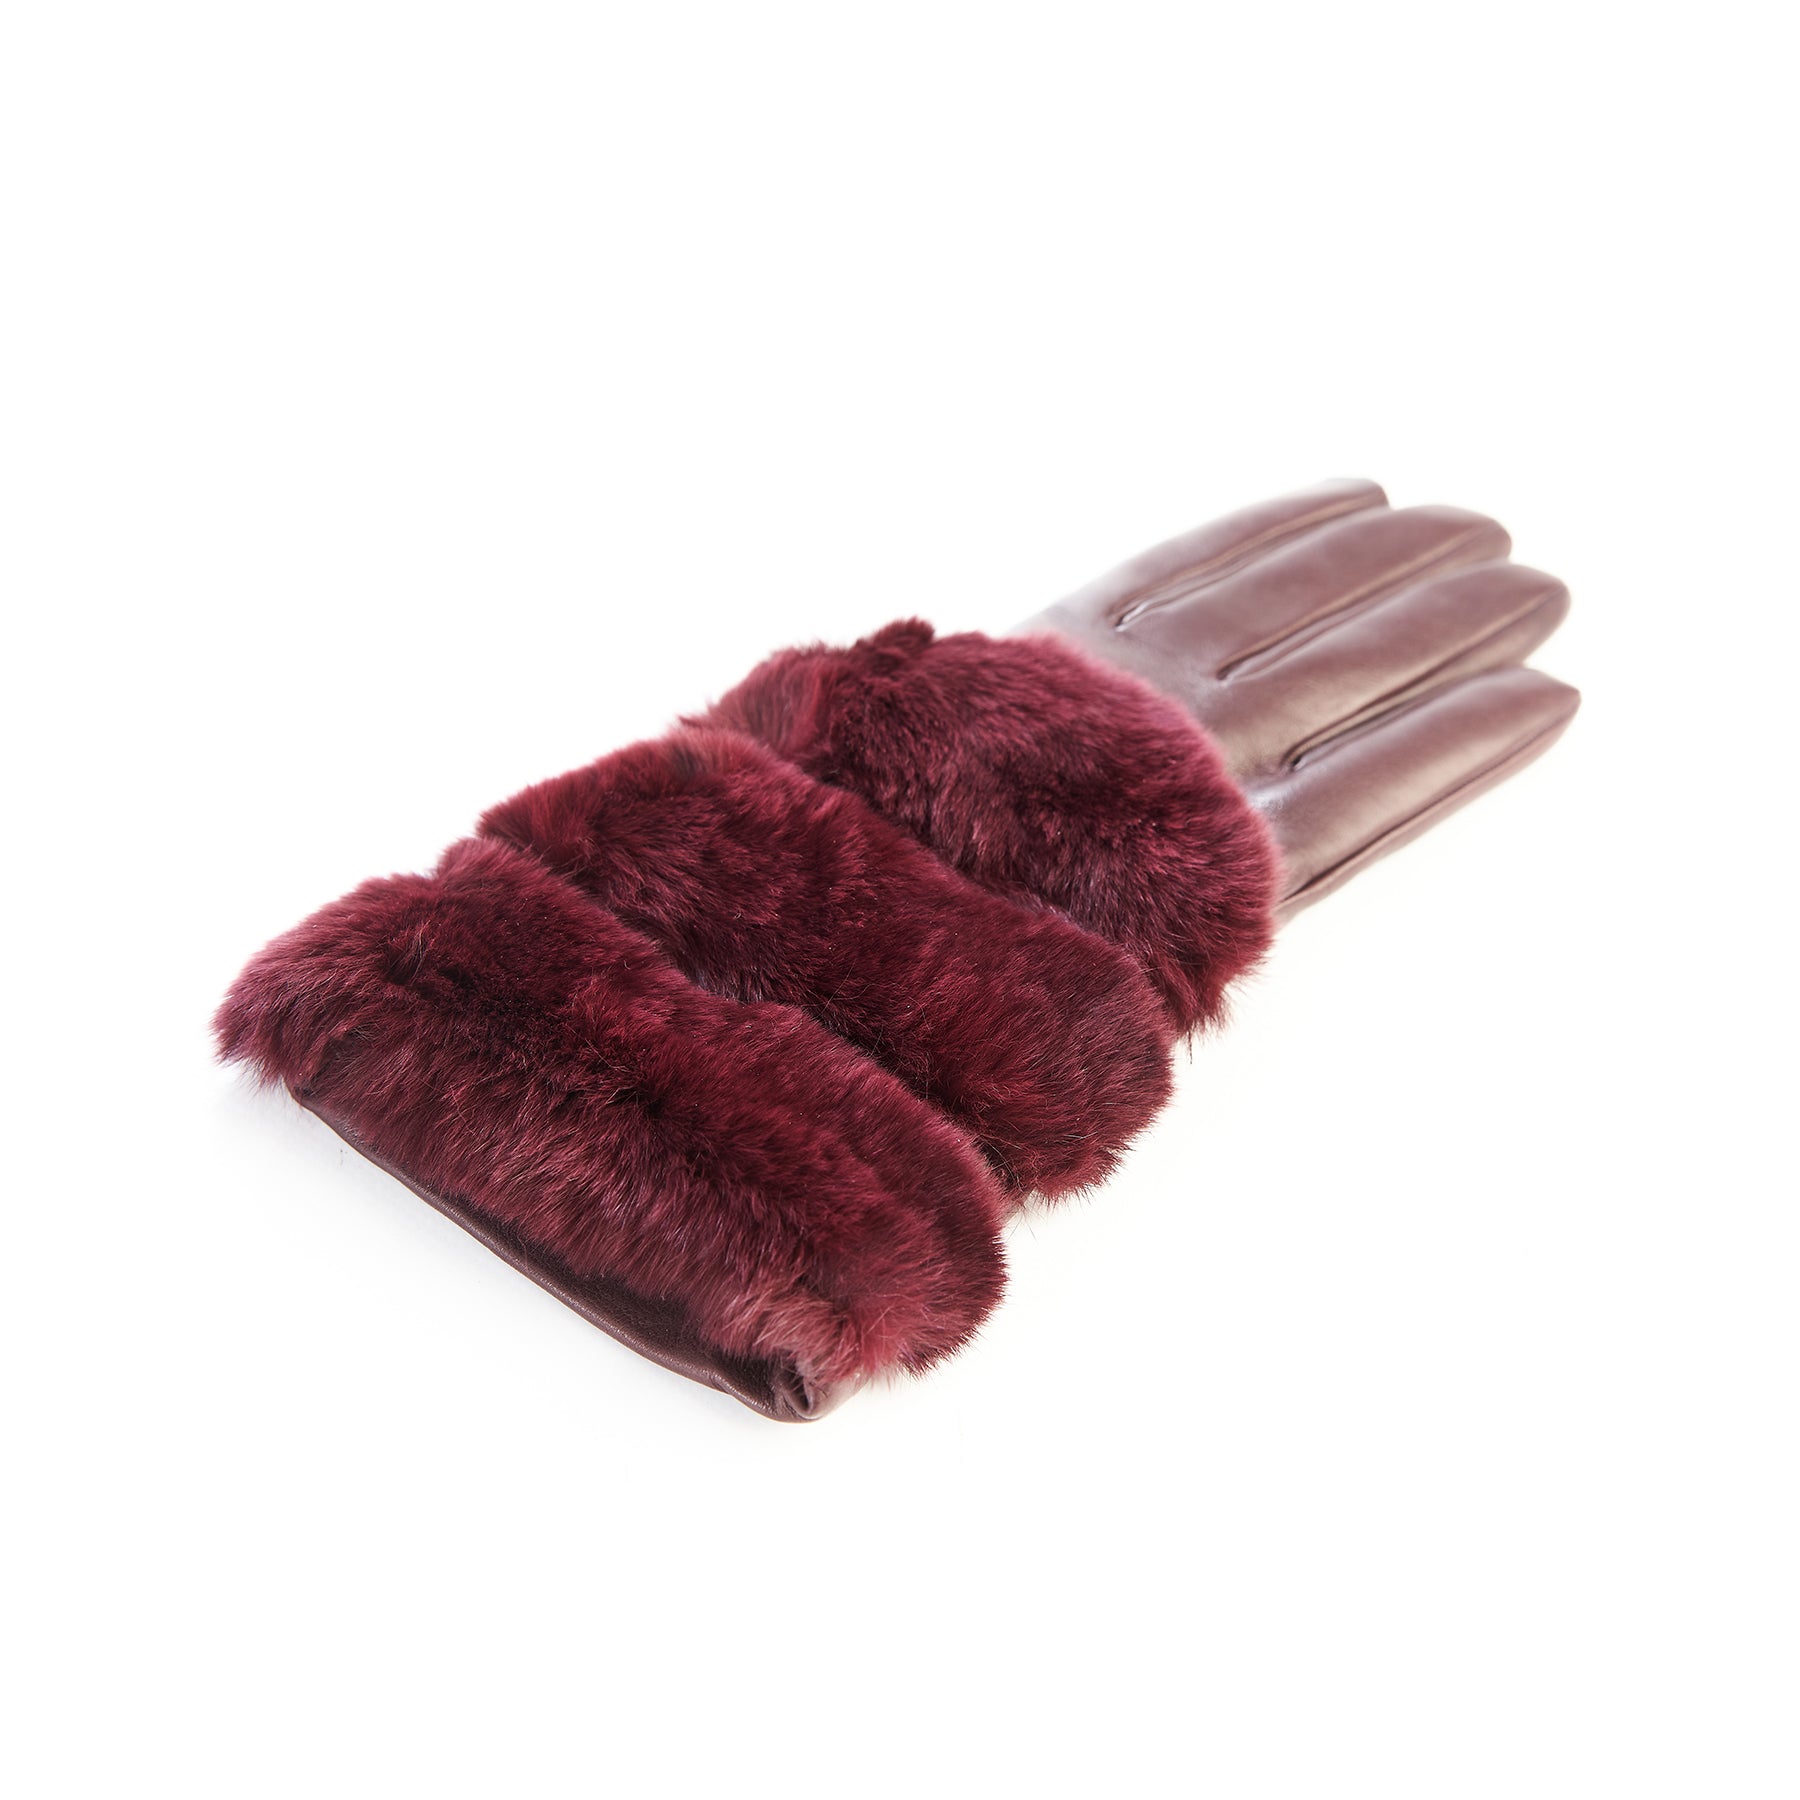 Women's gloves in bordeaux nappa leather with natural fur